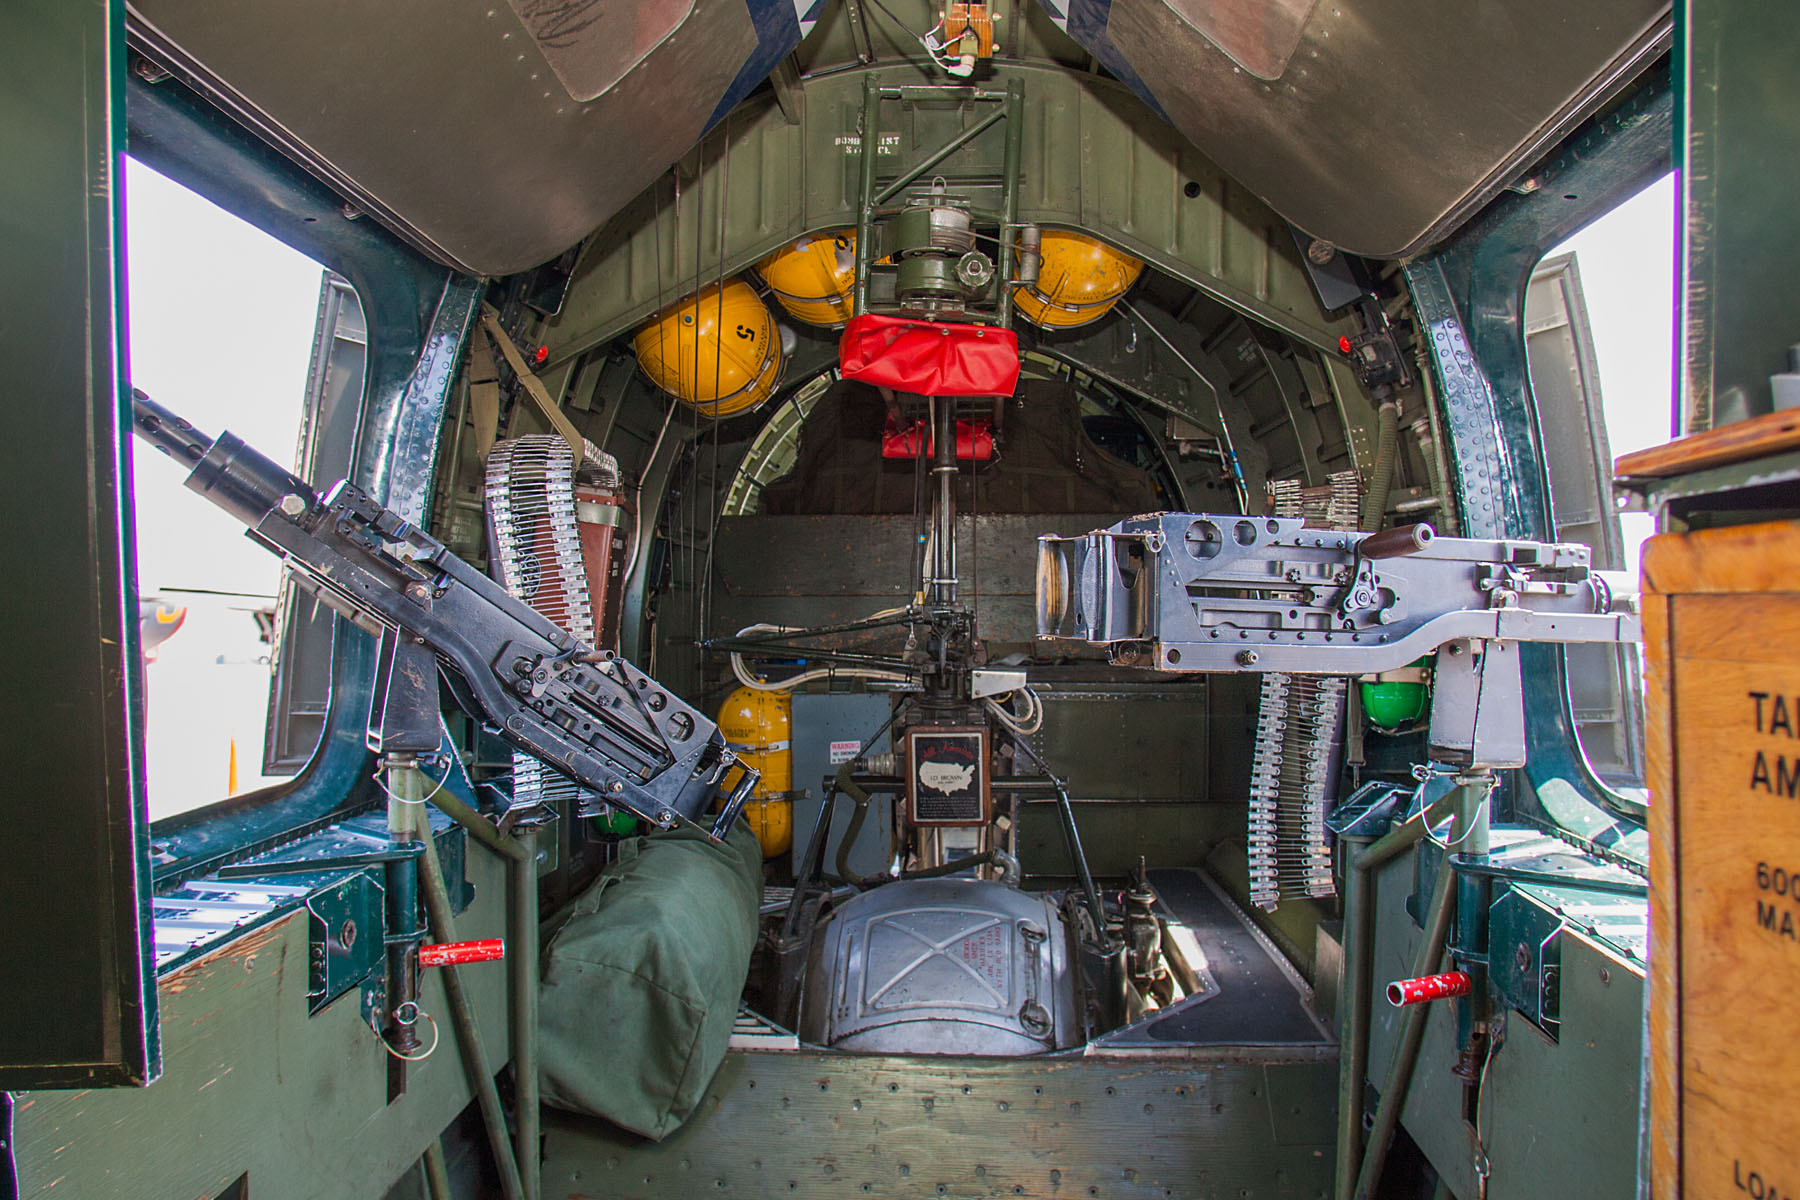 Inside B-24 Liberator "Witchcraft," waist guns, Wings of Freedom tour.  This photo is on page 97 of the book Witchcraft B-24 Liberator by Kenny Kemp, 2017.  Click for next photo.